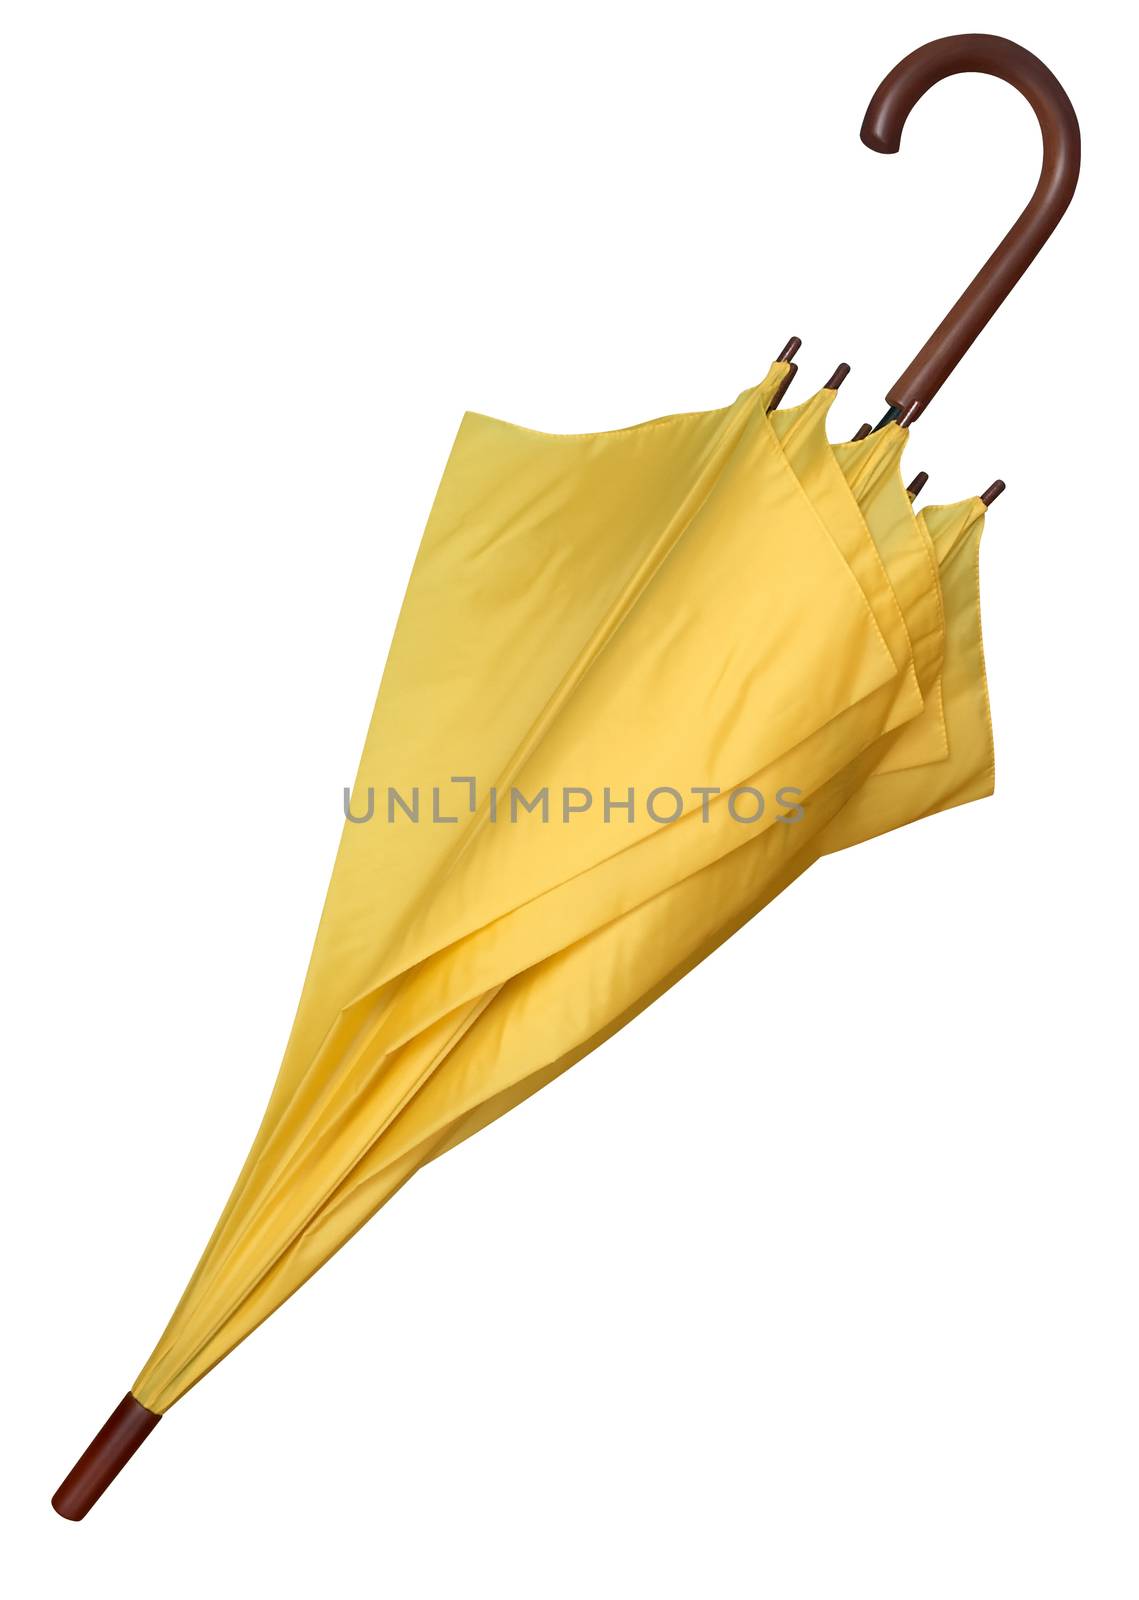 Closed yellow umbrella isolated on white background. Clipping path.